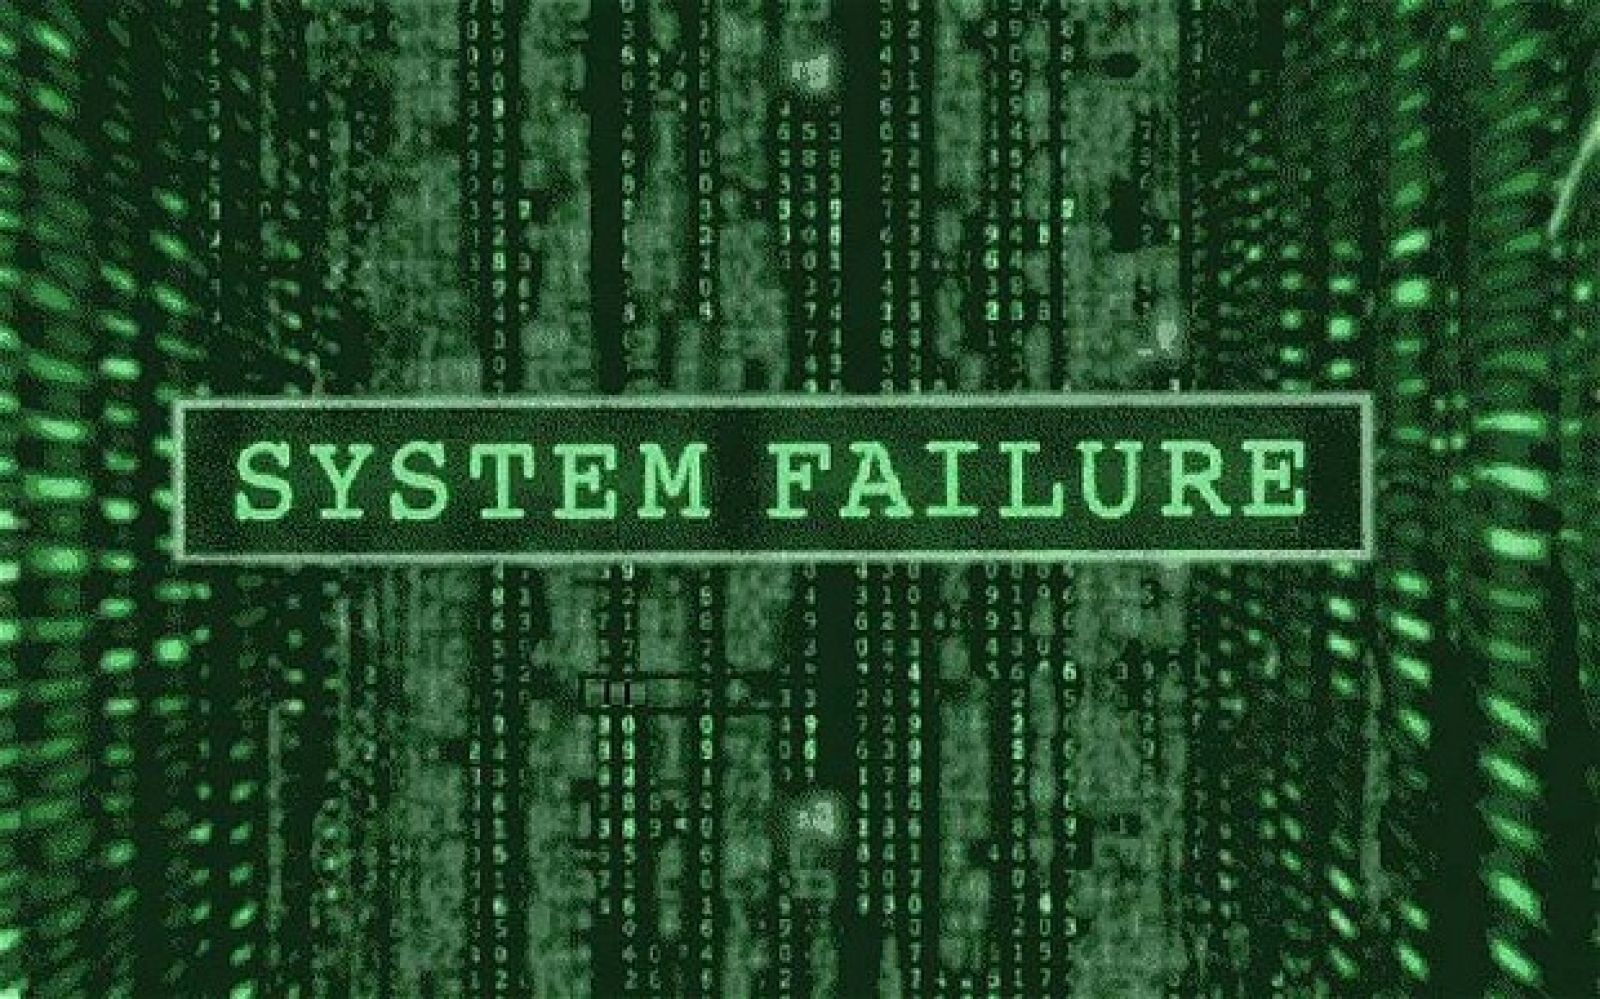 These systems are failing. Матрица отказ систем. Матрица System failure. Сбой системы. Сбой системы картинка.